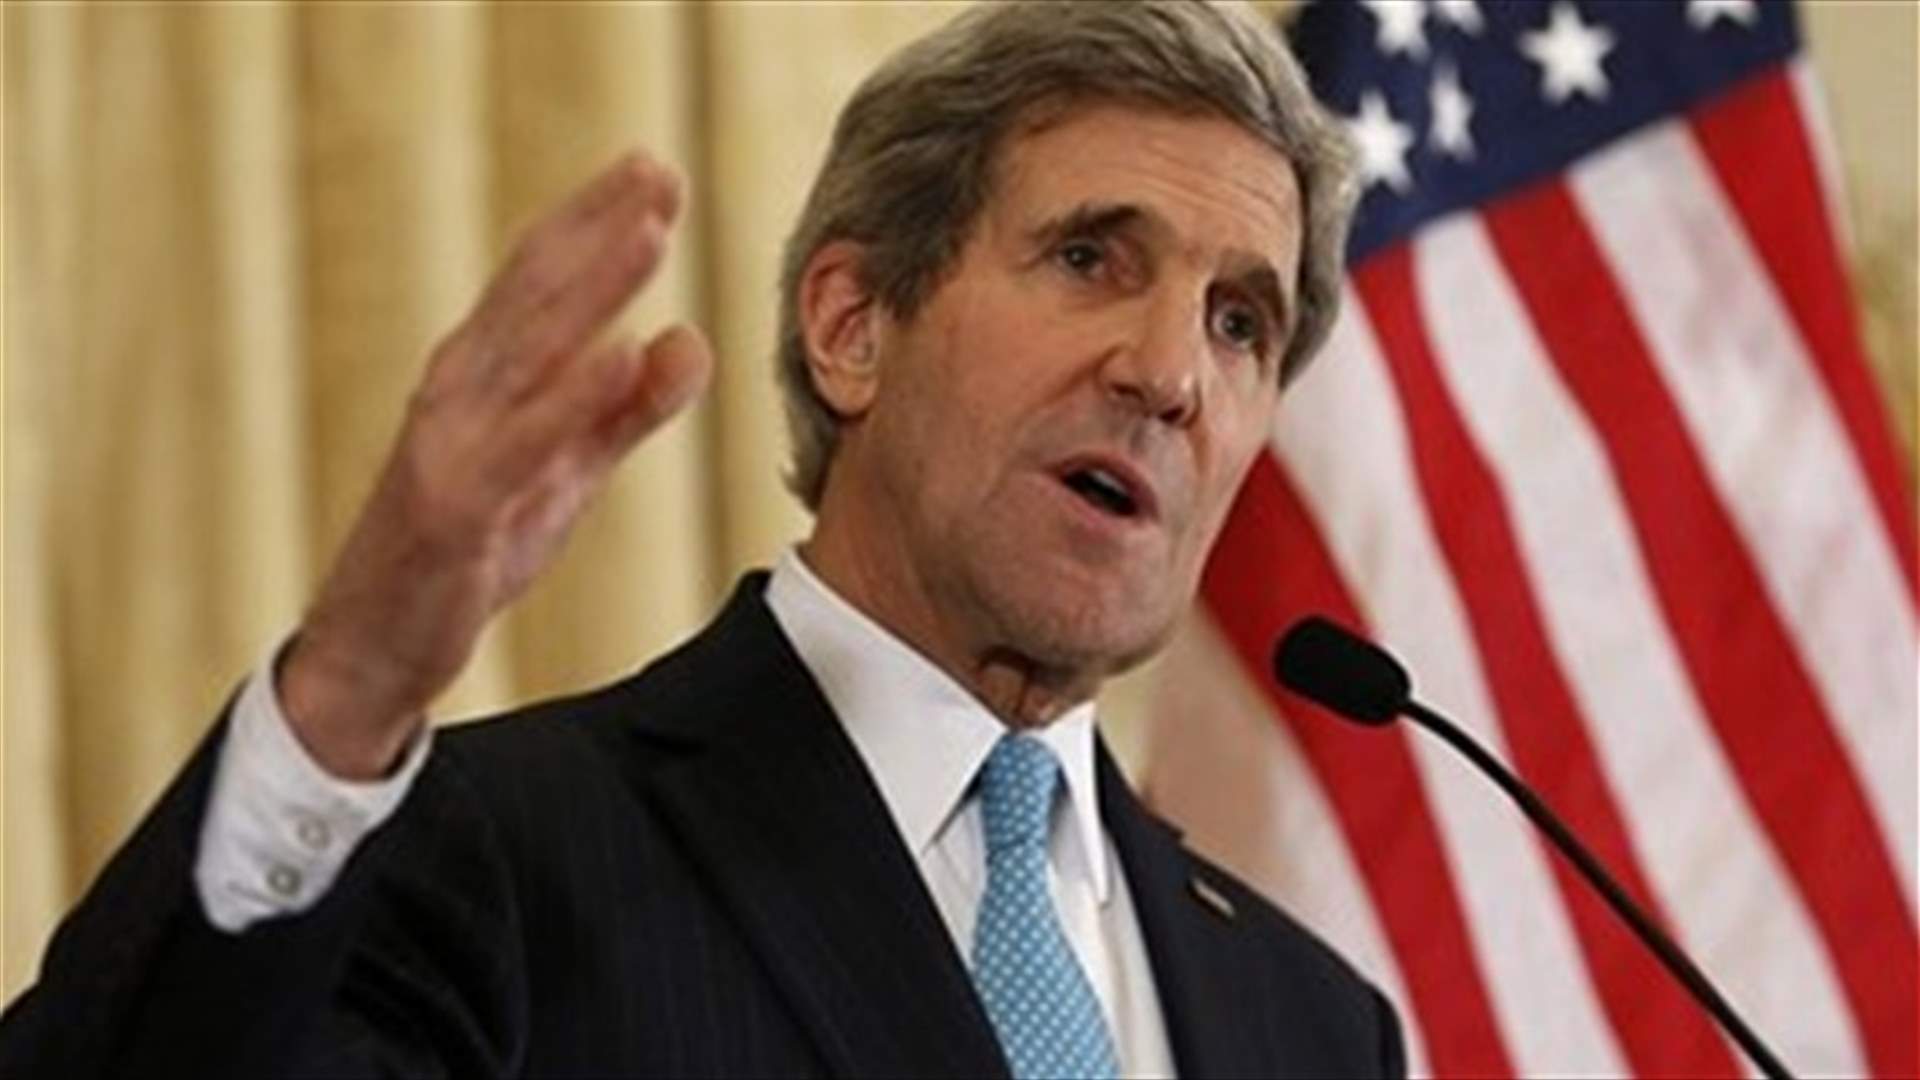 Britain scolds Kerry for comments on Israeli government